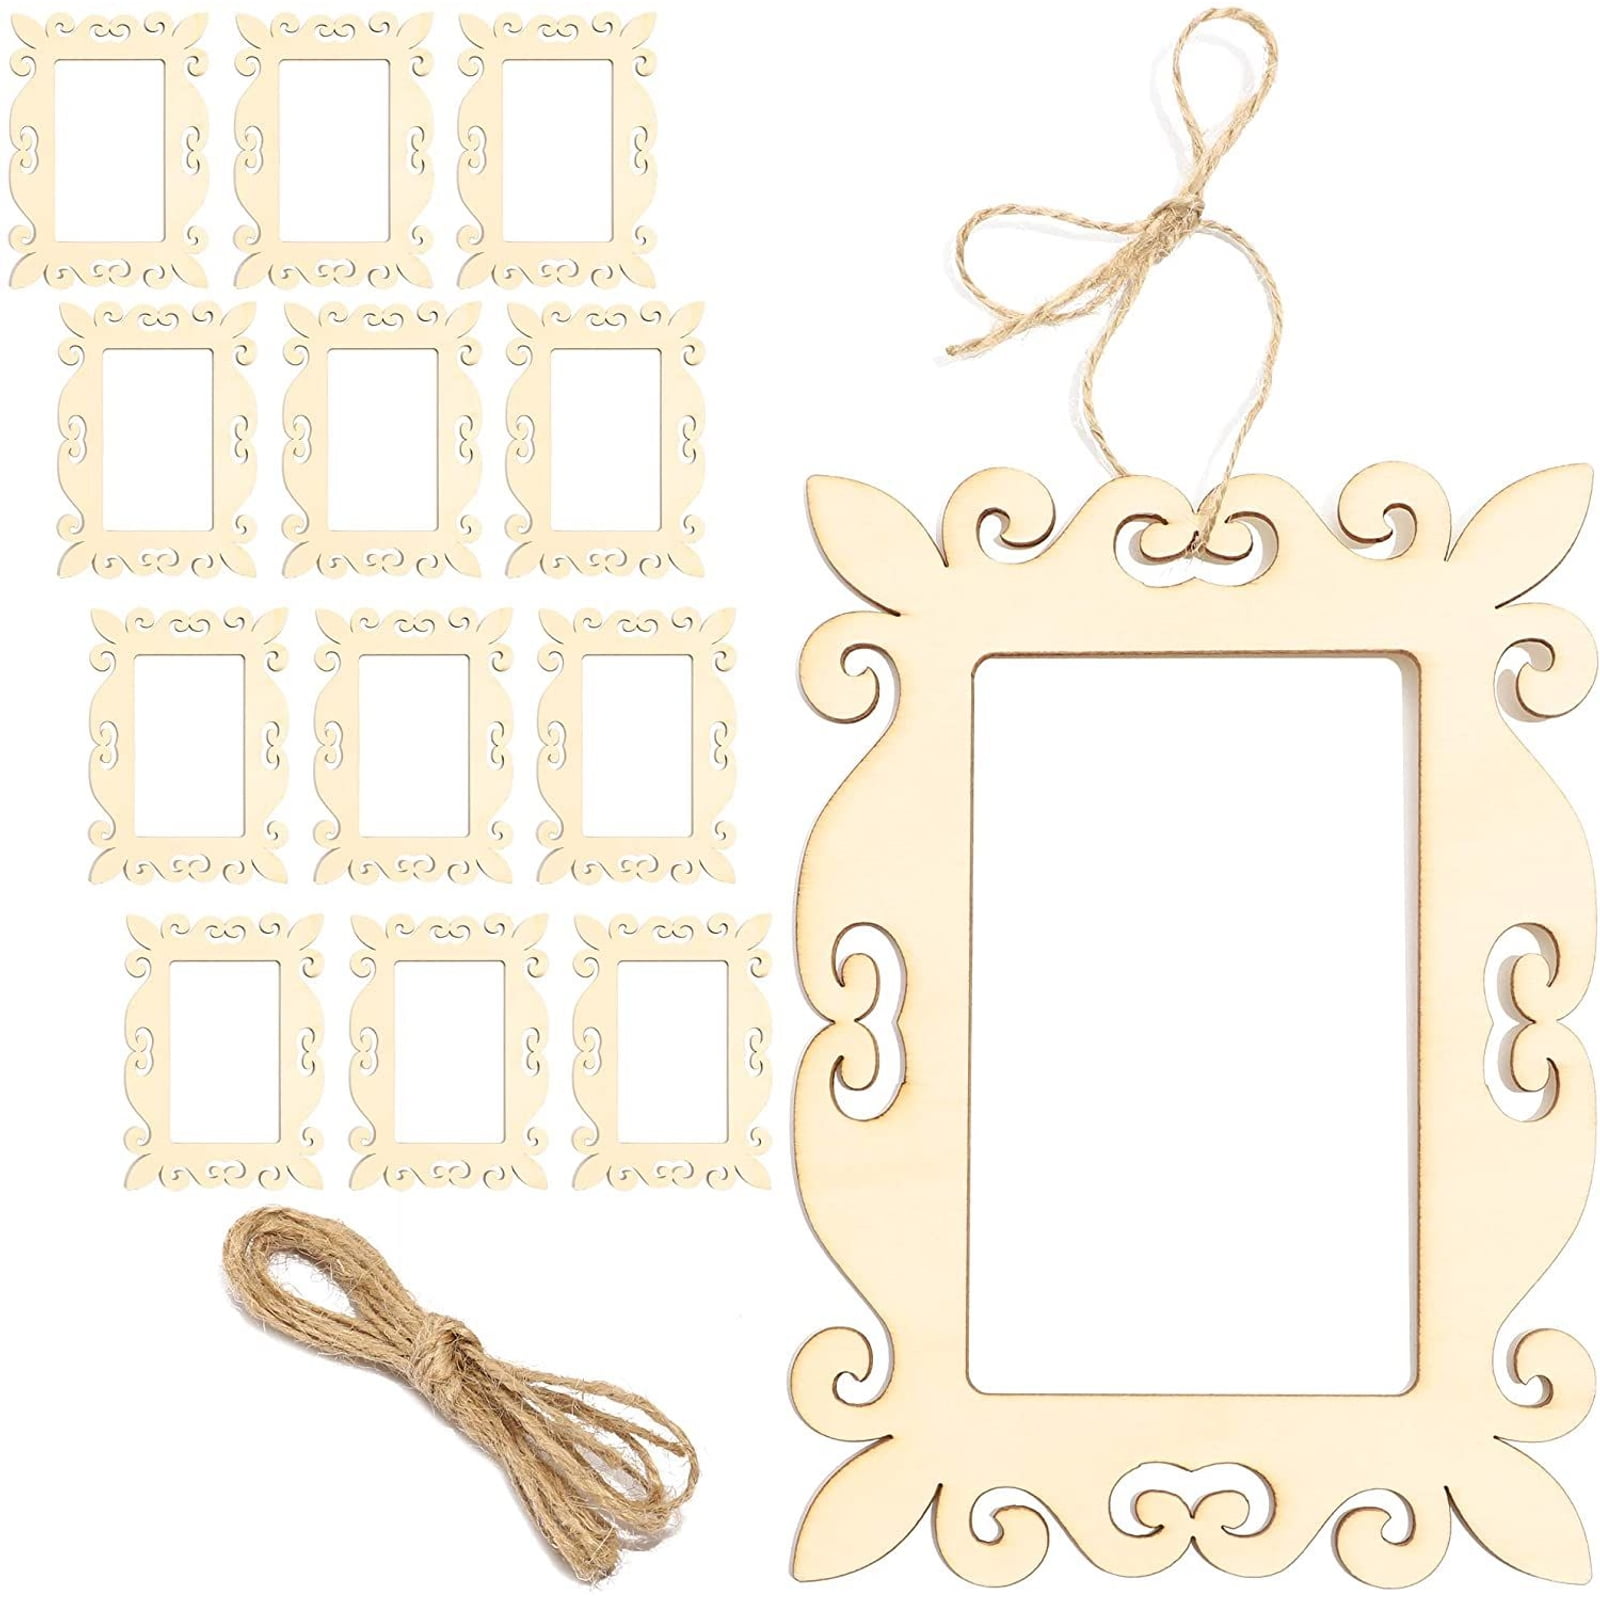 Details about   50 Pack Cardboard Paper Picture Photo Frame DIY Hanging Kit 4 x 6 Inch Kraft 